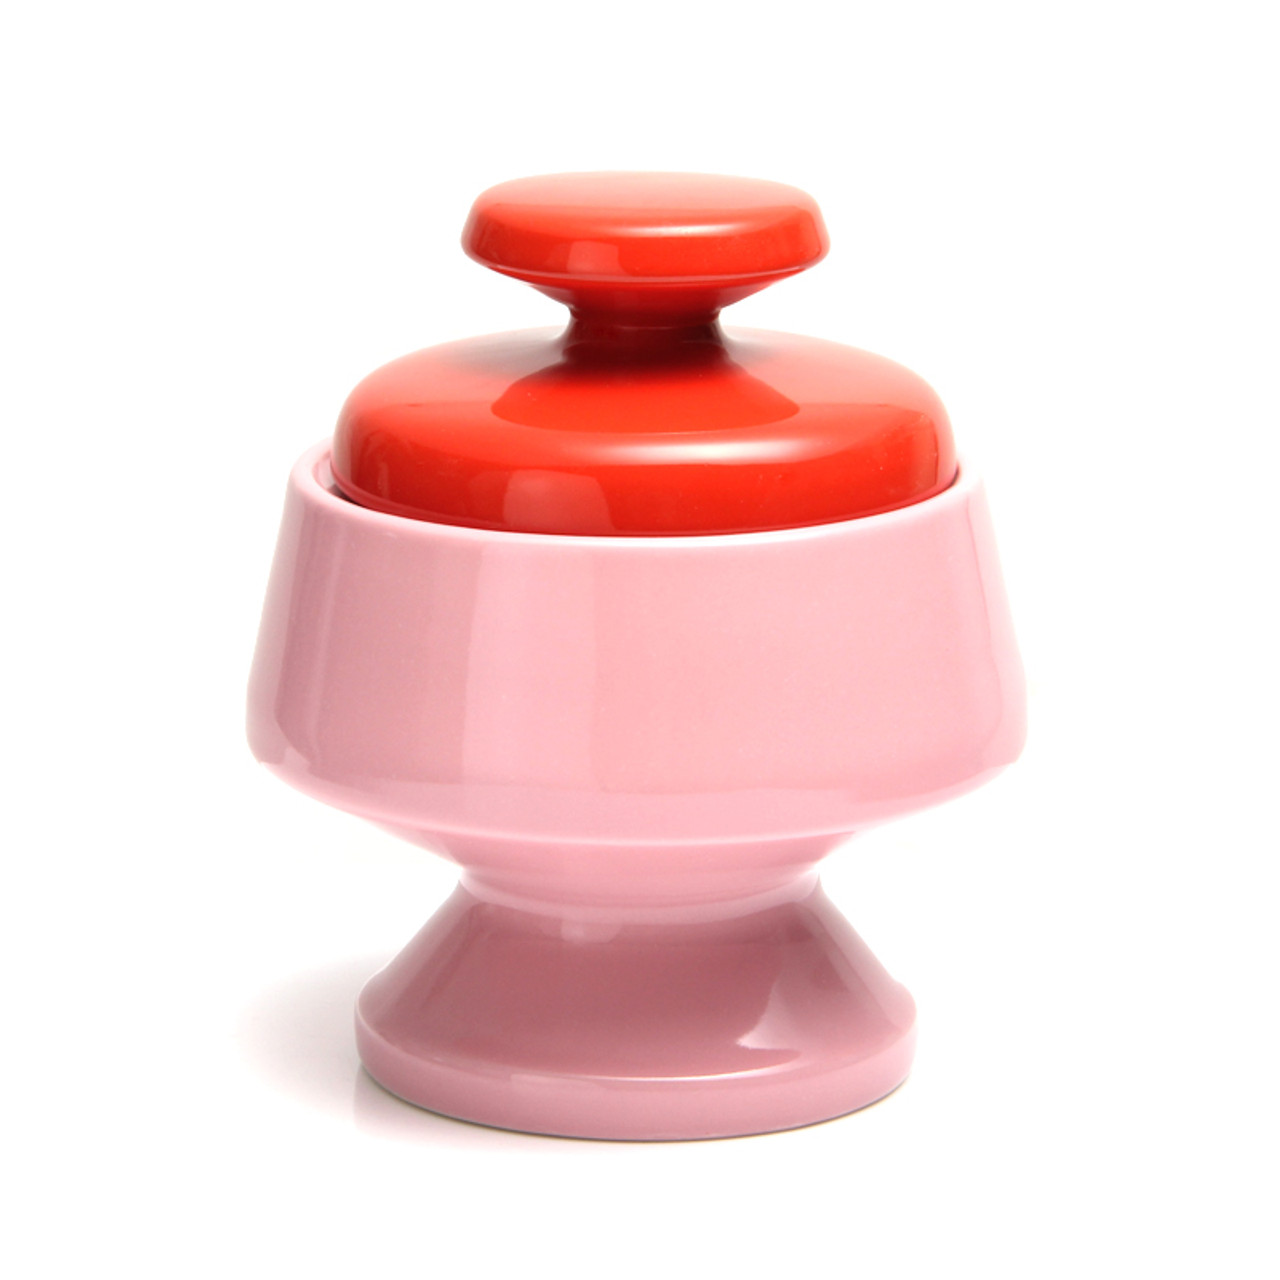 SAGAFORM Pink and Red Pop Bowl with Lid 